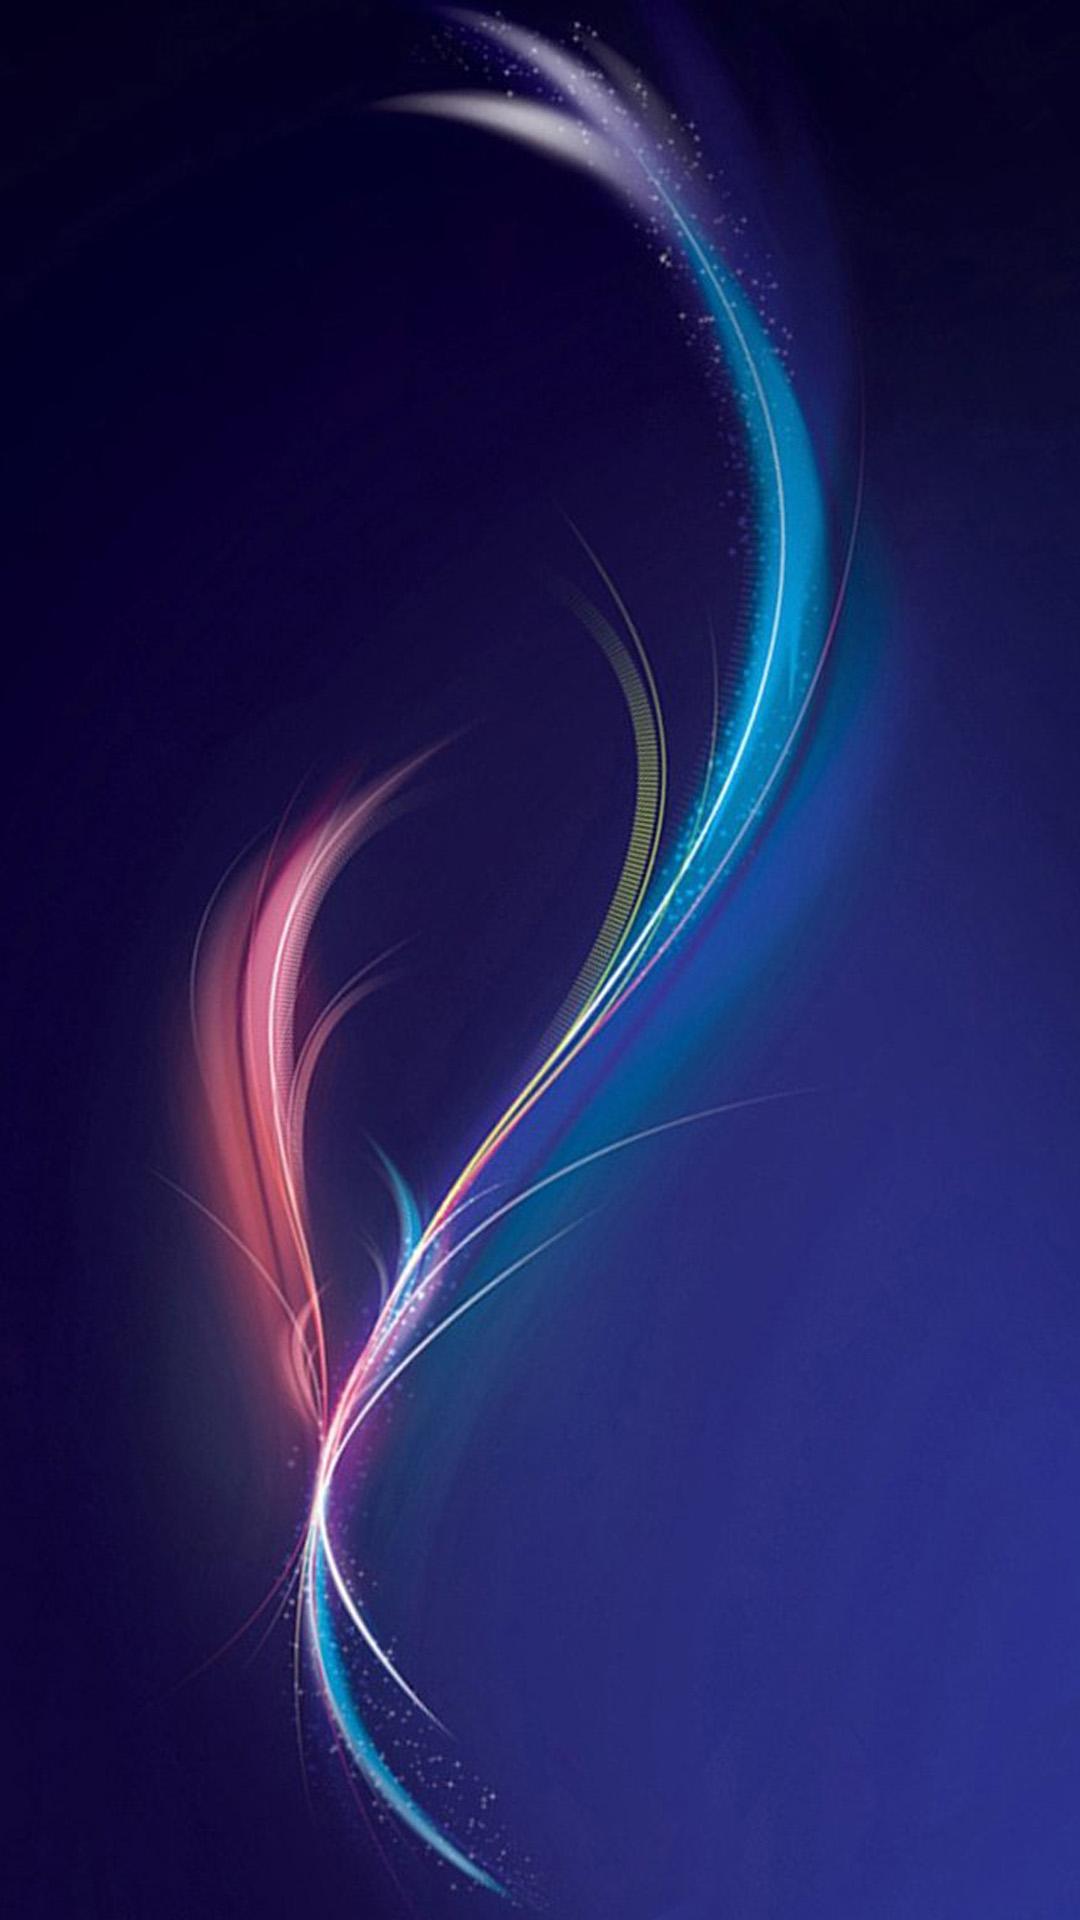 Android Wallpapers - Wallpaper - #1 Source for free Awesome wallpapers ...